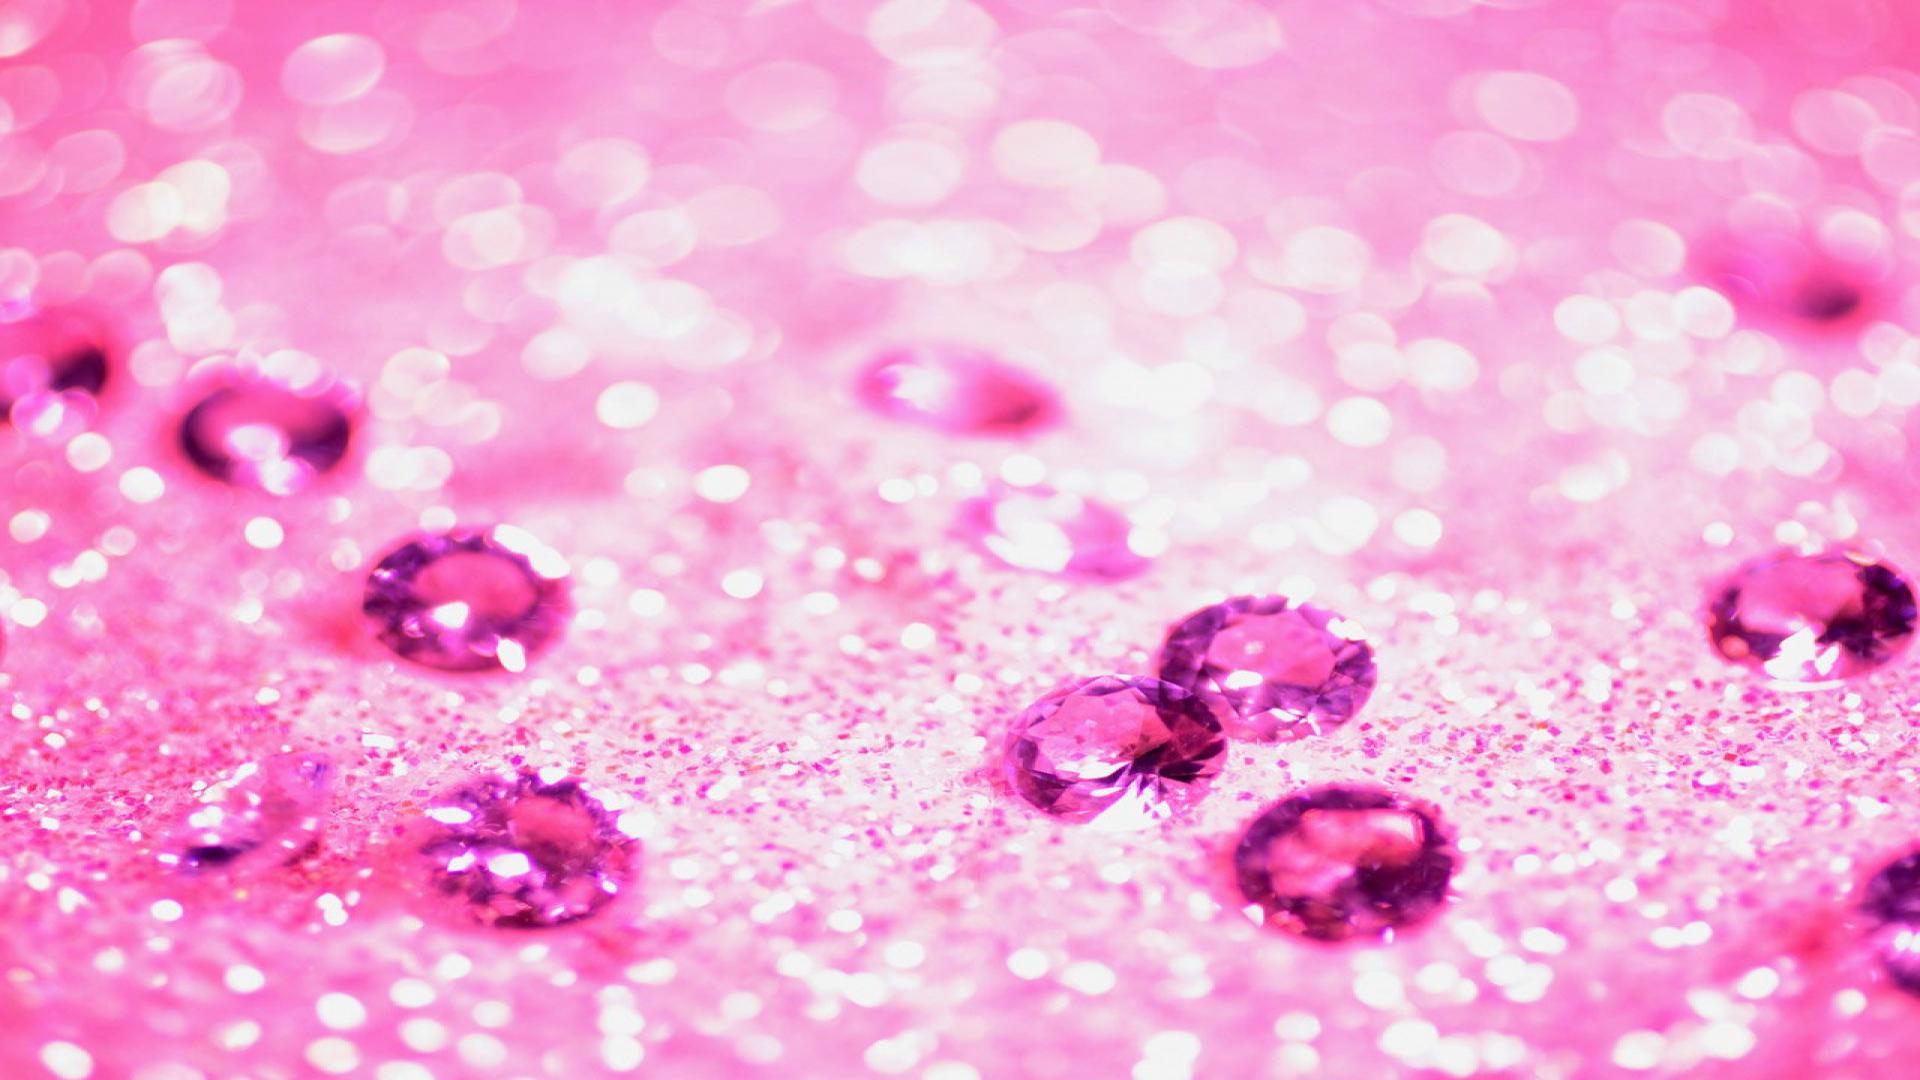 Sparkle Wallpapers Best Wallpapers HD Wallpapers Download Free Images Wallpaper [wallpaper981.blogspot.com]